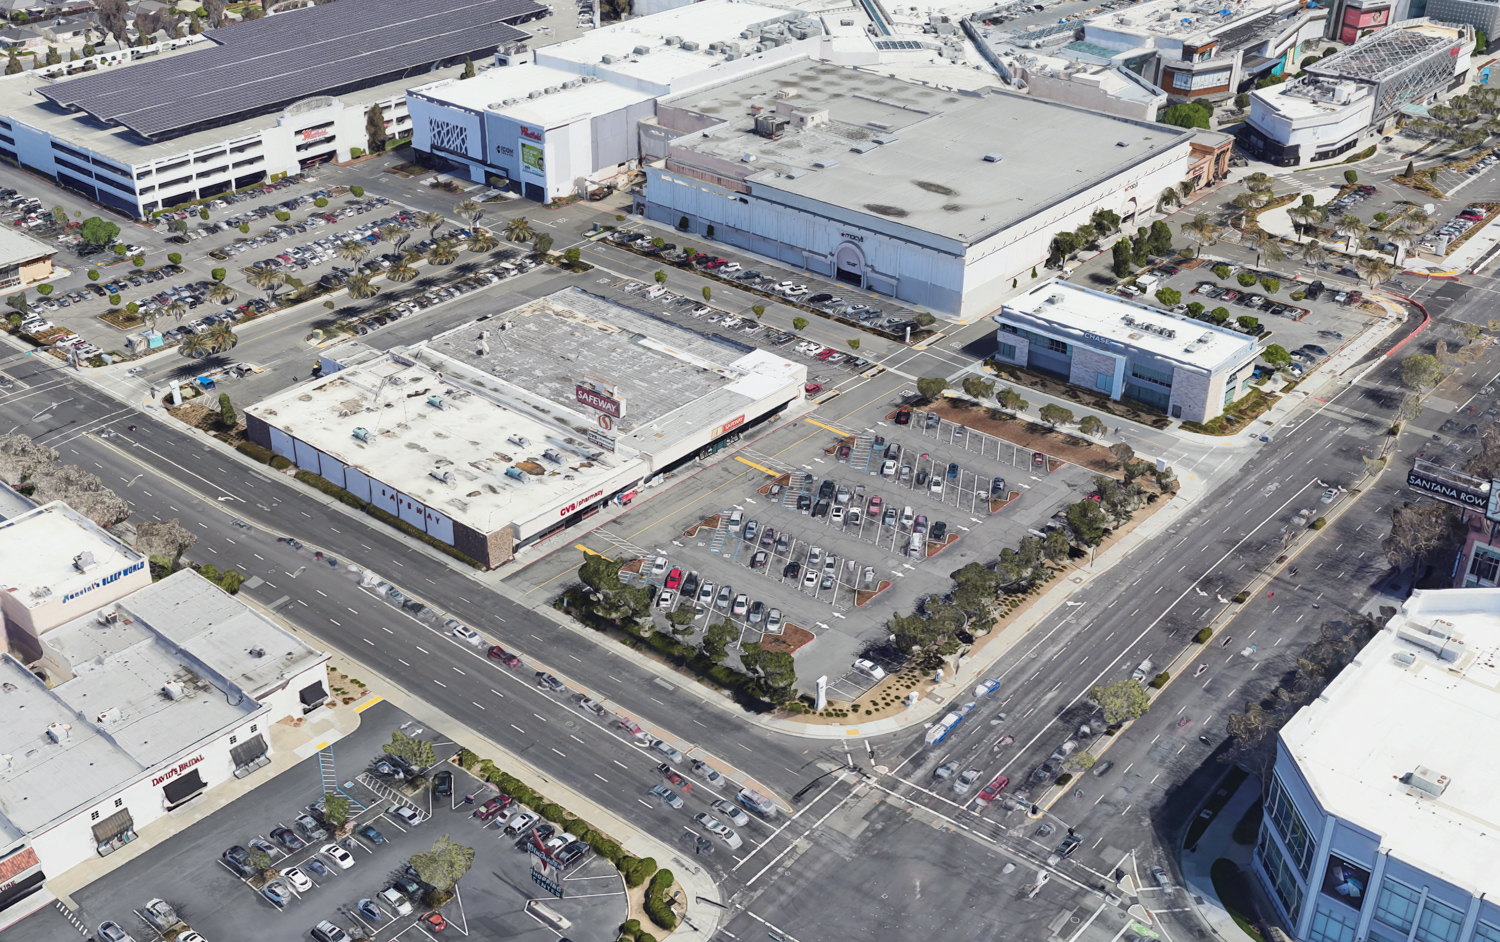 Westfield Valley Fair mall in San Jose to charge for parking